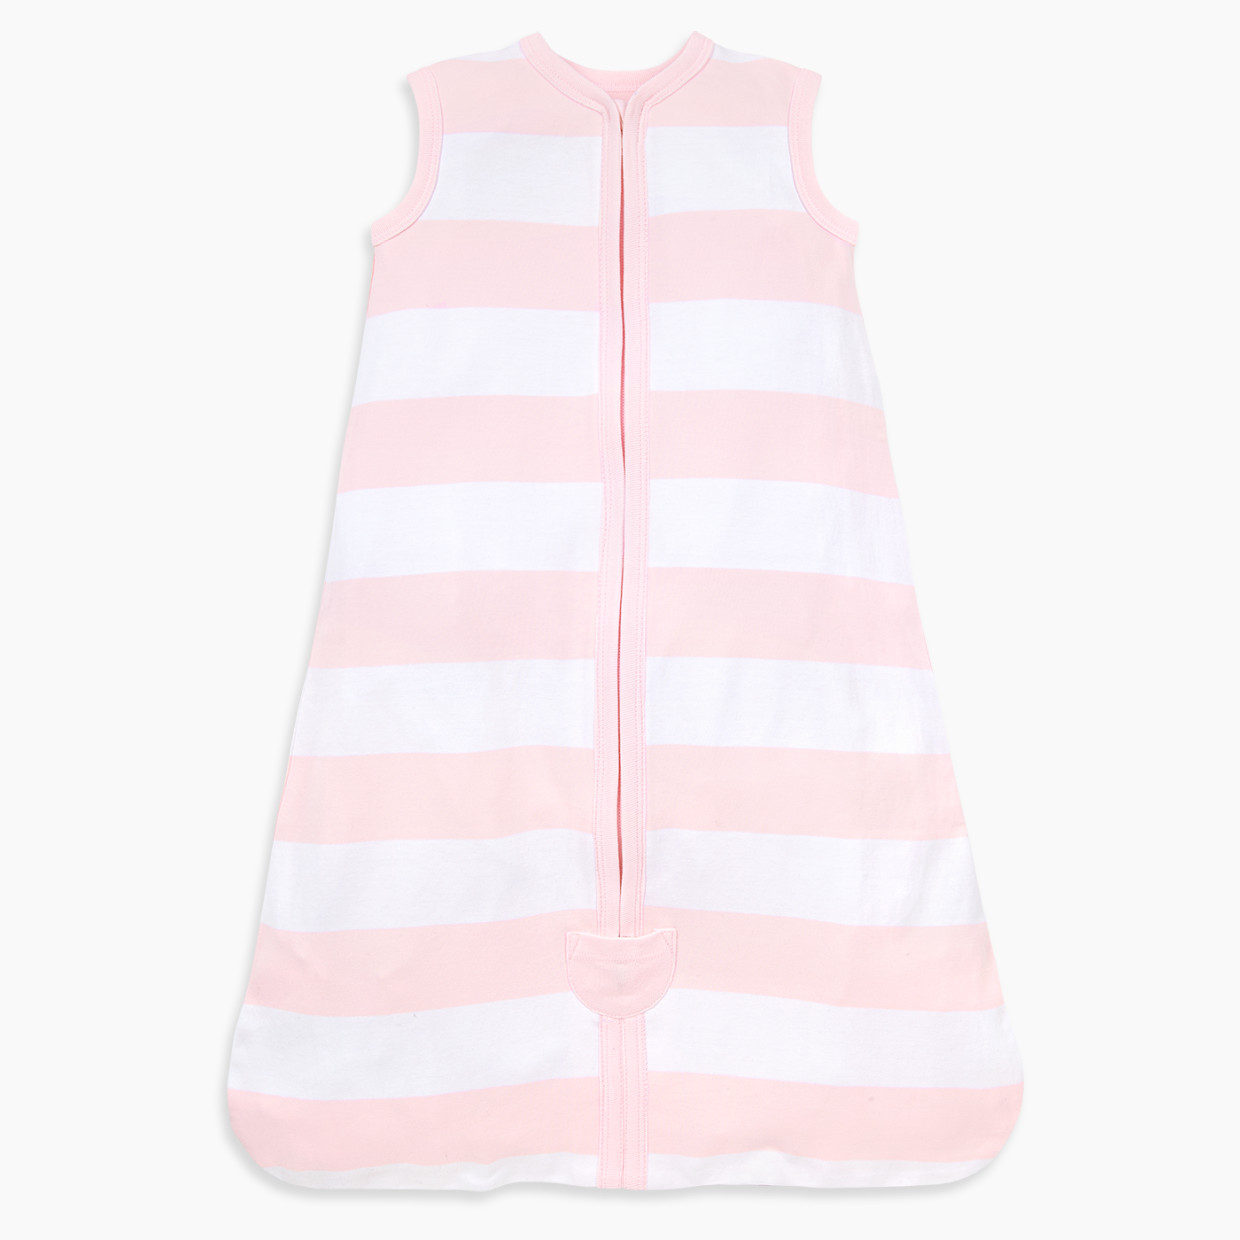 Burt's Bees Baby Beekeeper Organic Wearable Blanket - Blossom Rugby Stripe, 0-6 Months.